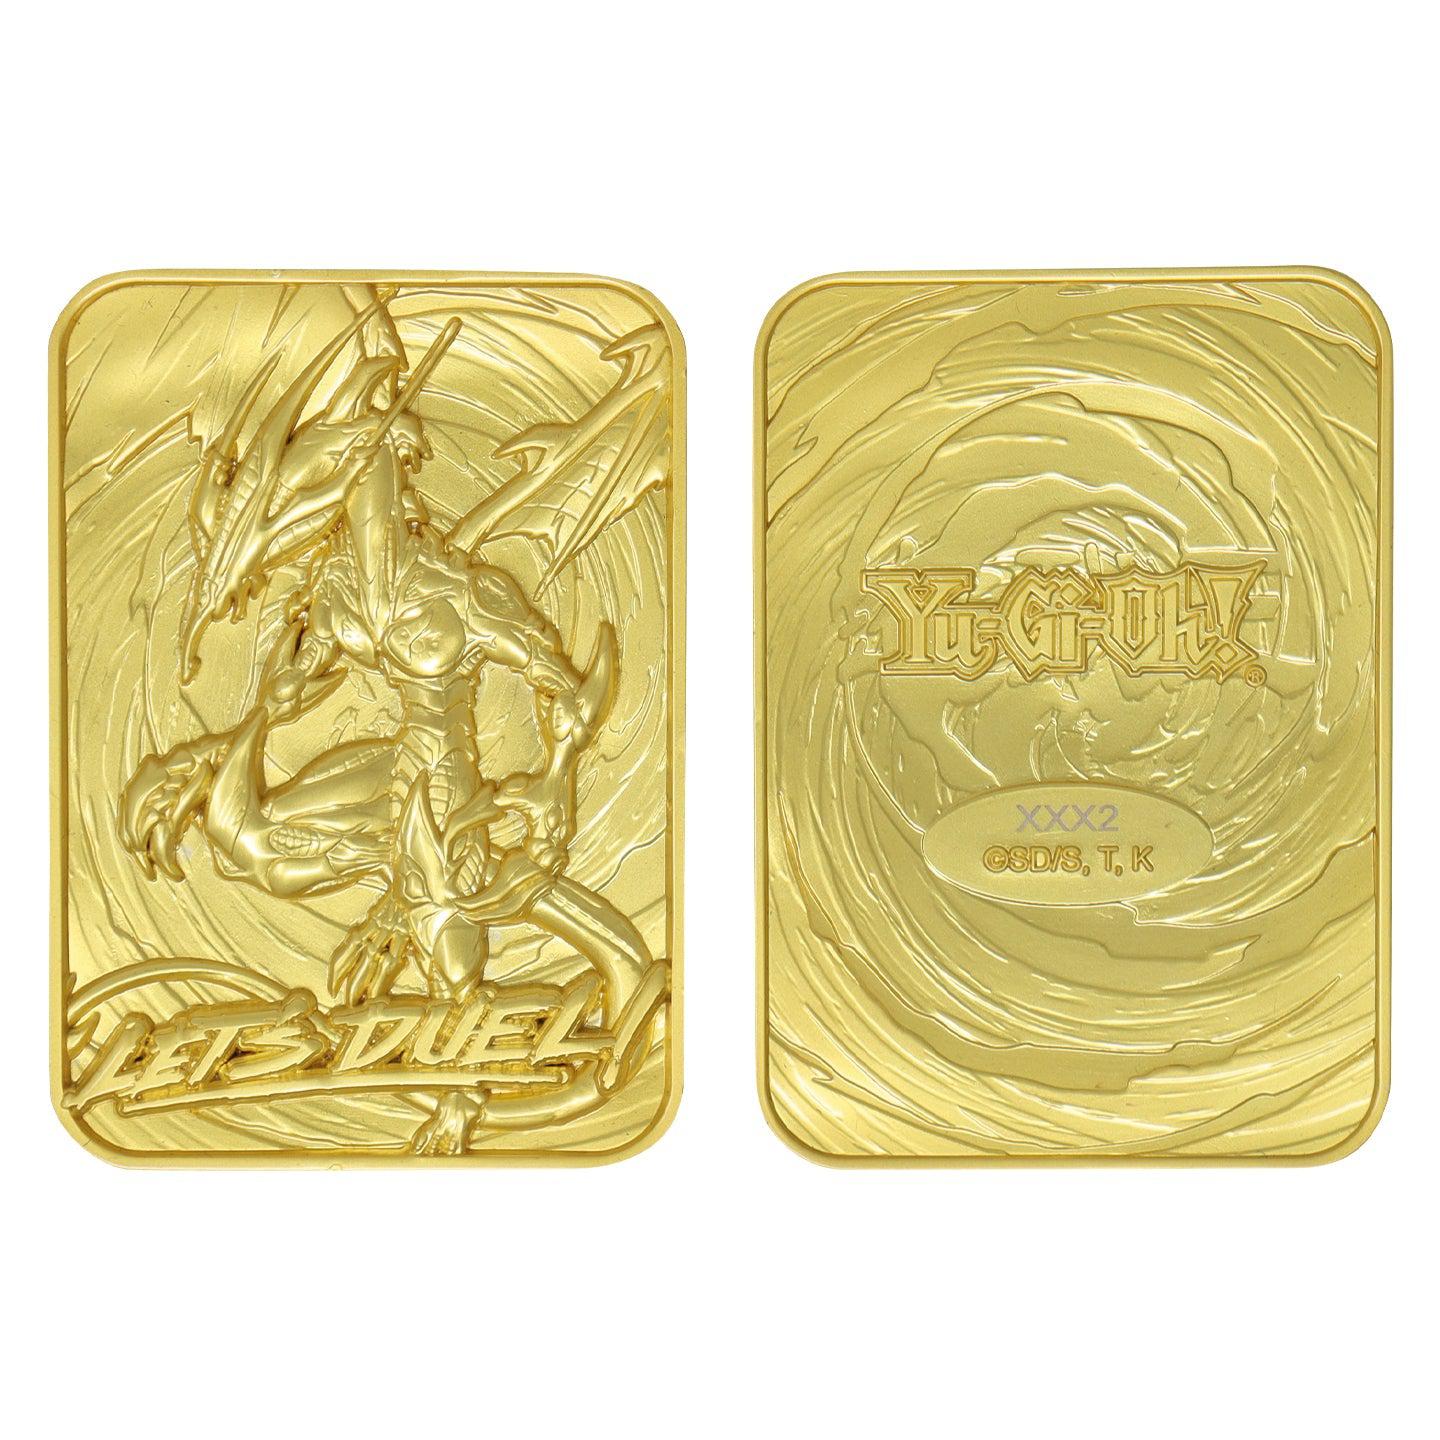 Yu-Gi-Oh! Limited Edition 24k Gold Plated Stardust Dragon Metal Card